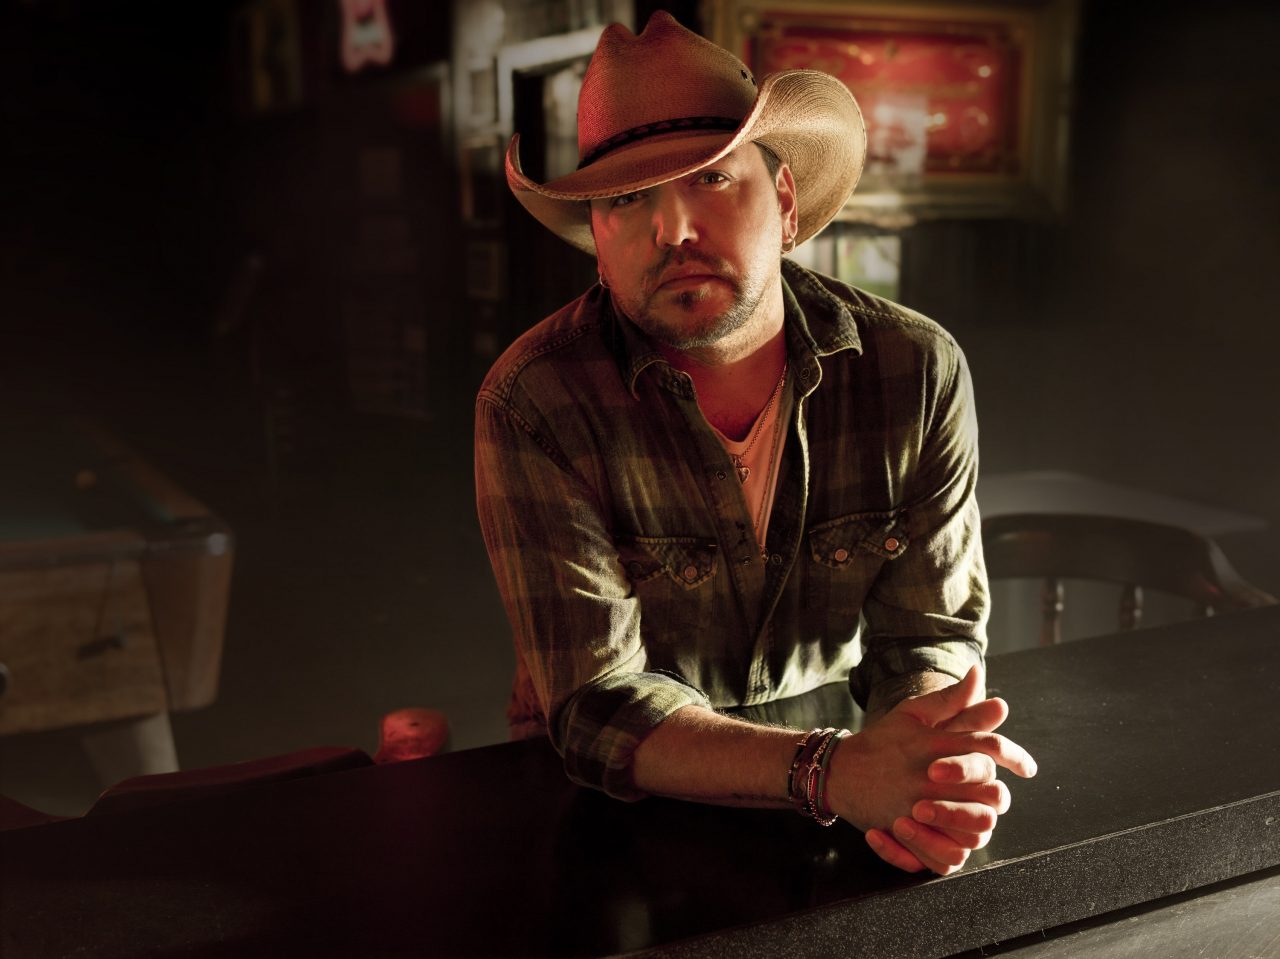 Jason Aldean is the ACM’s Next Artist of the Decade